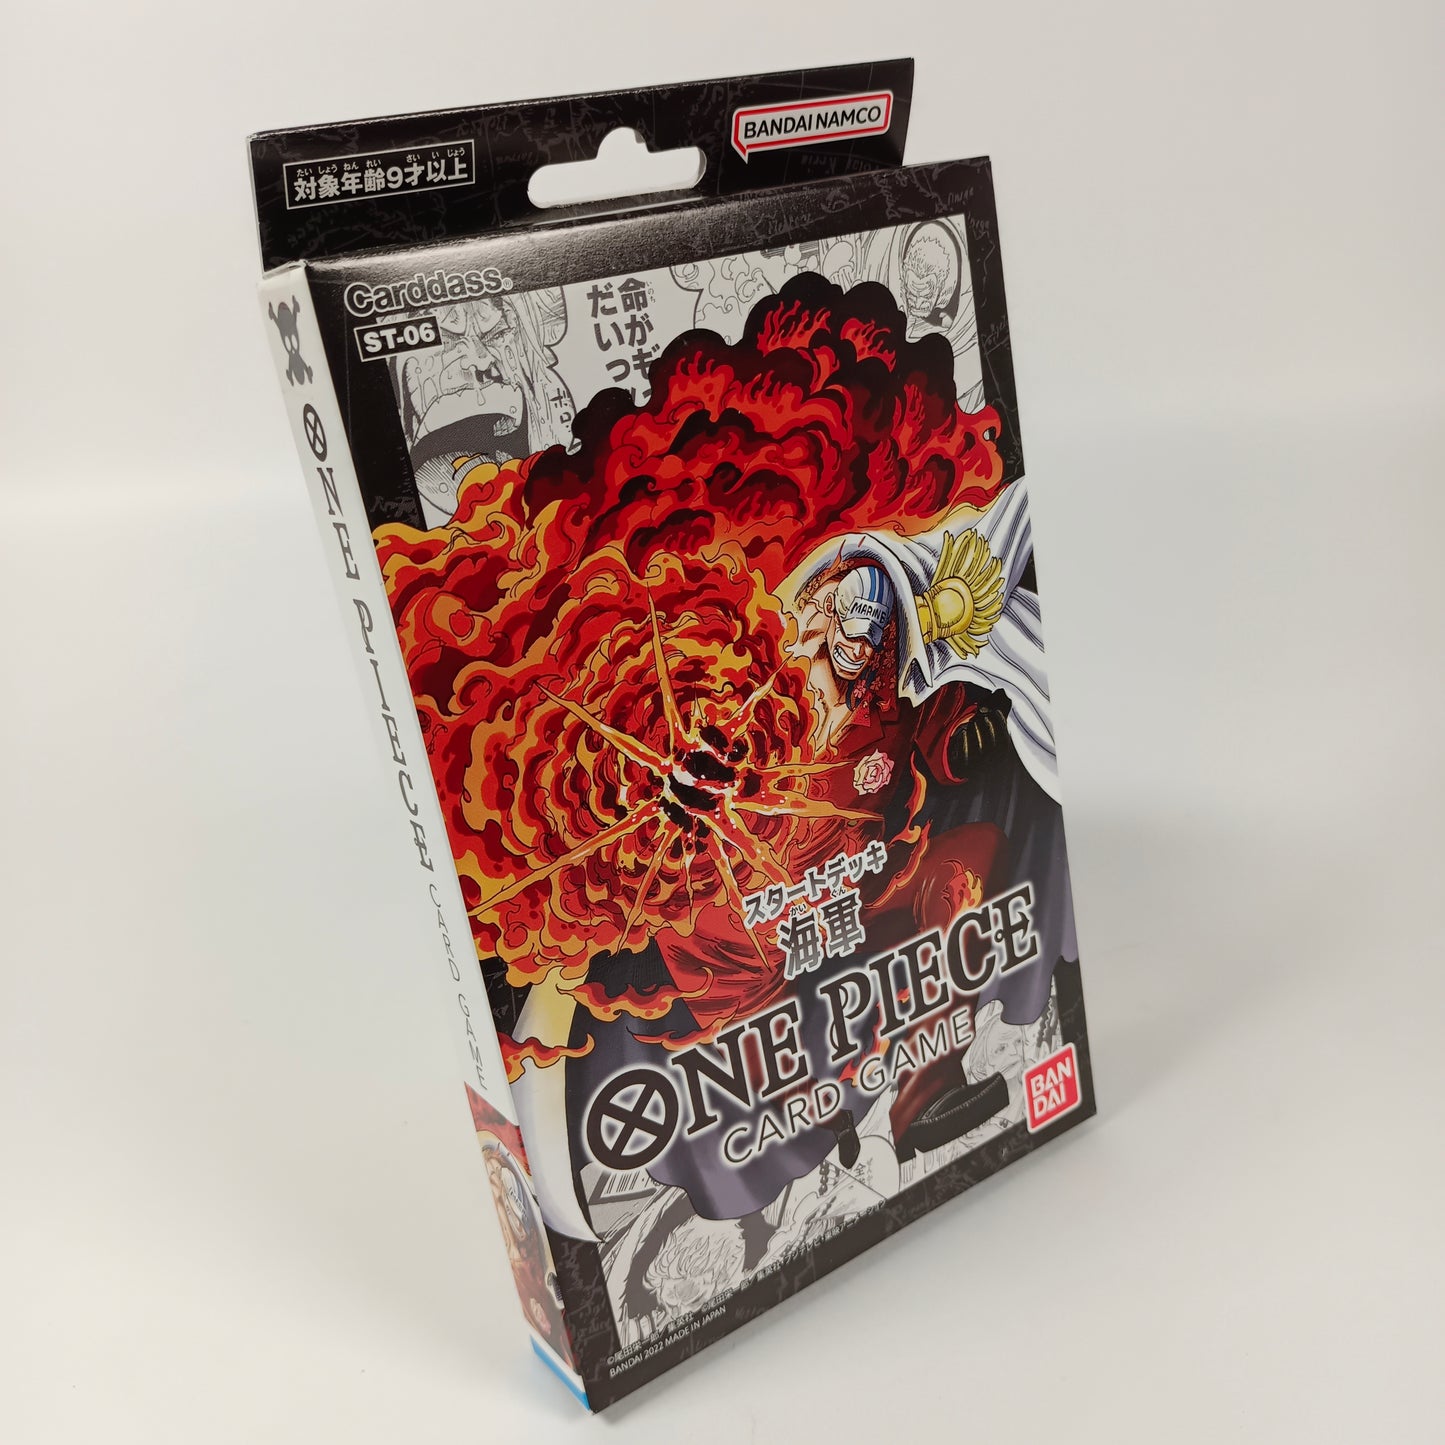 ONE PIECE CARD GAME ST-06